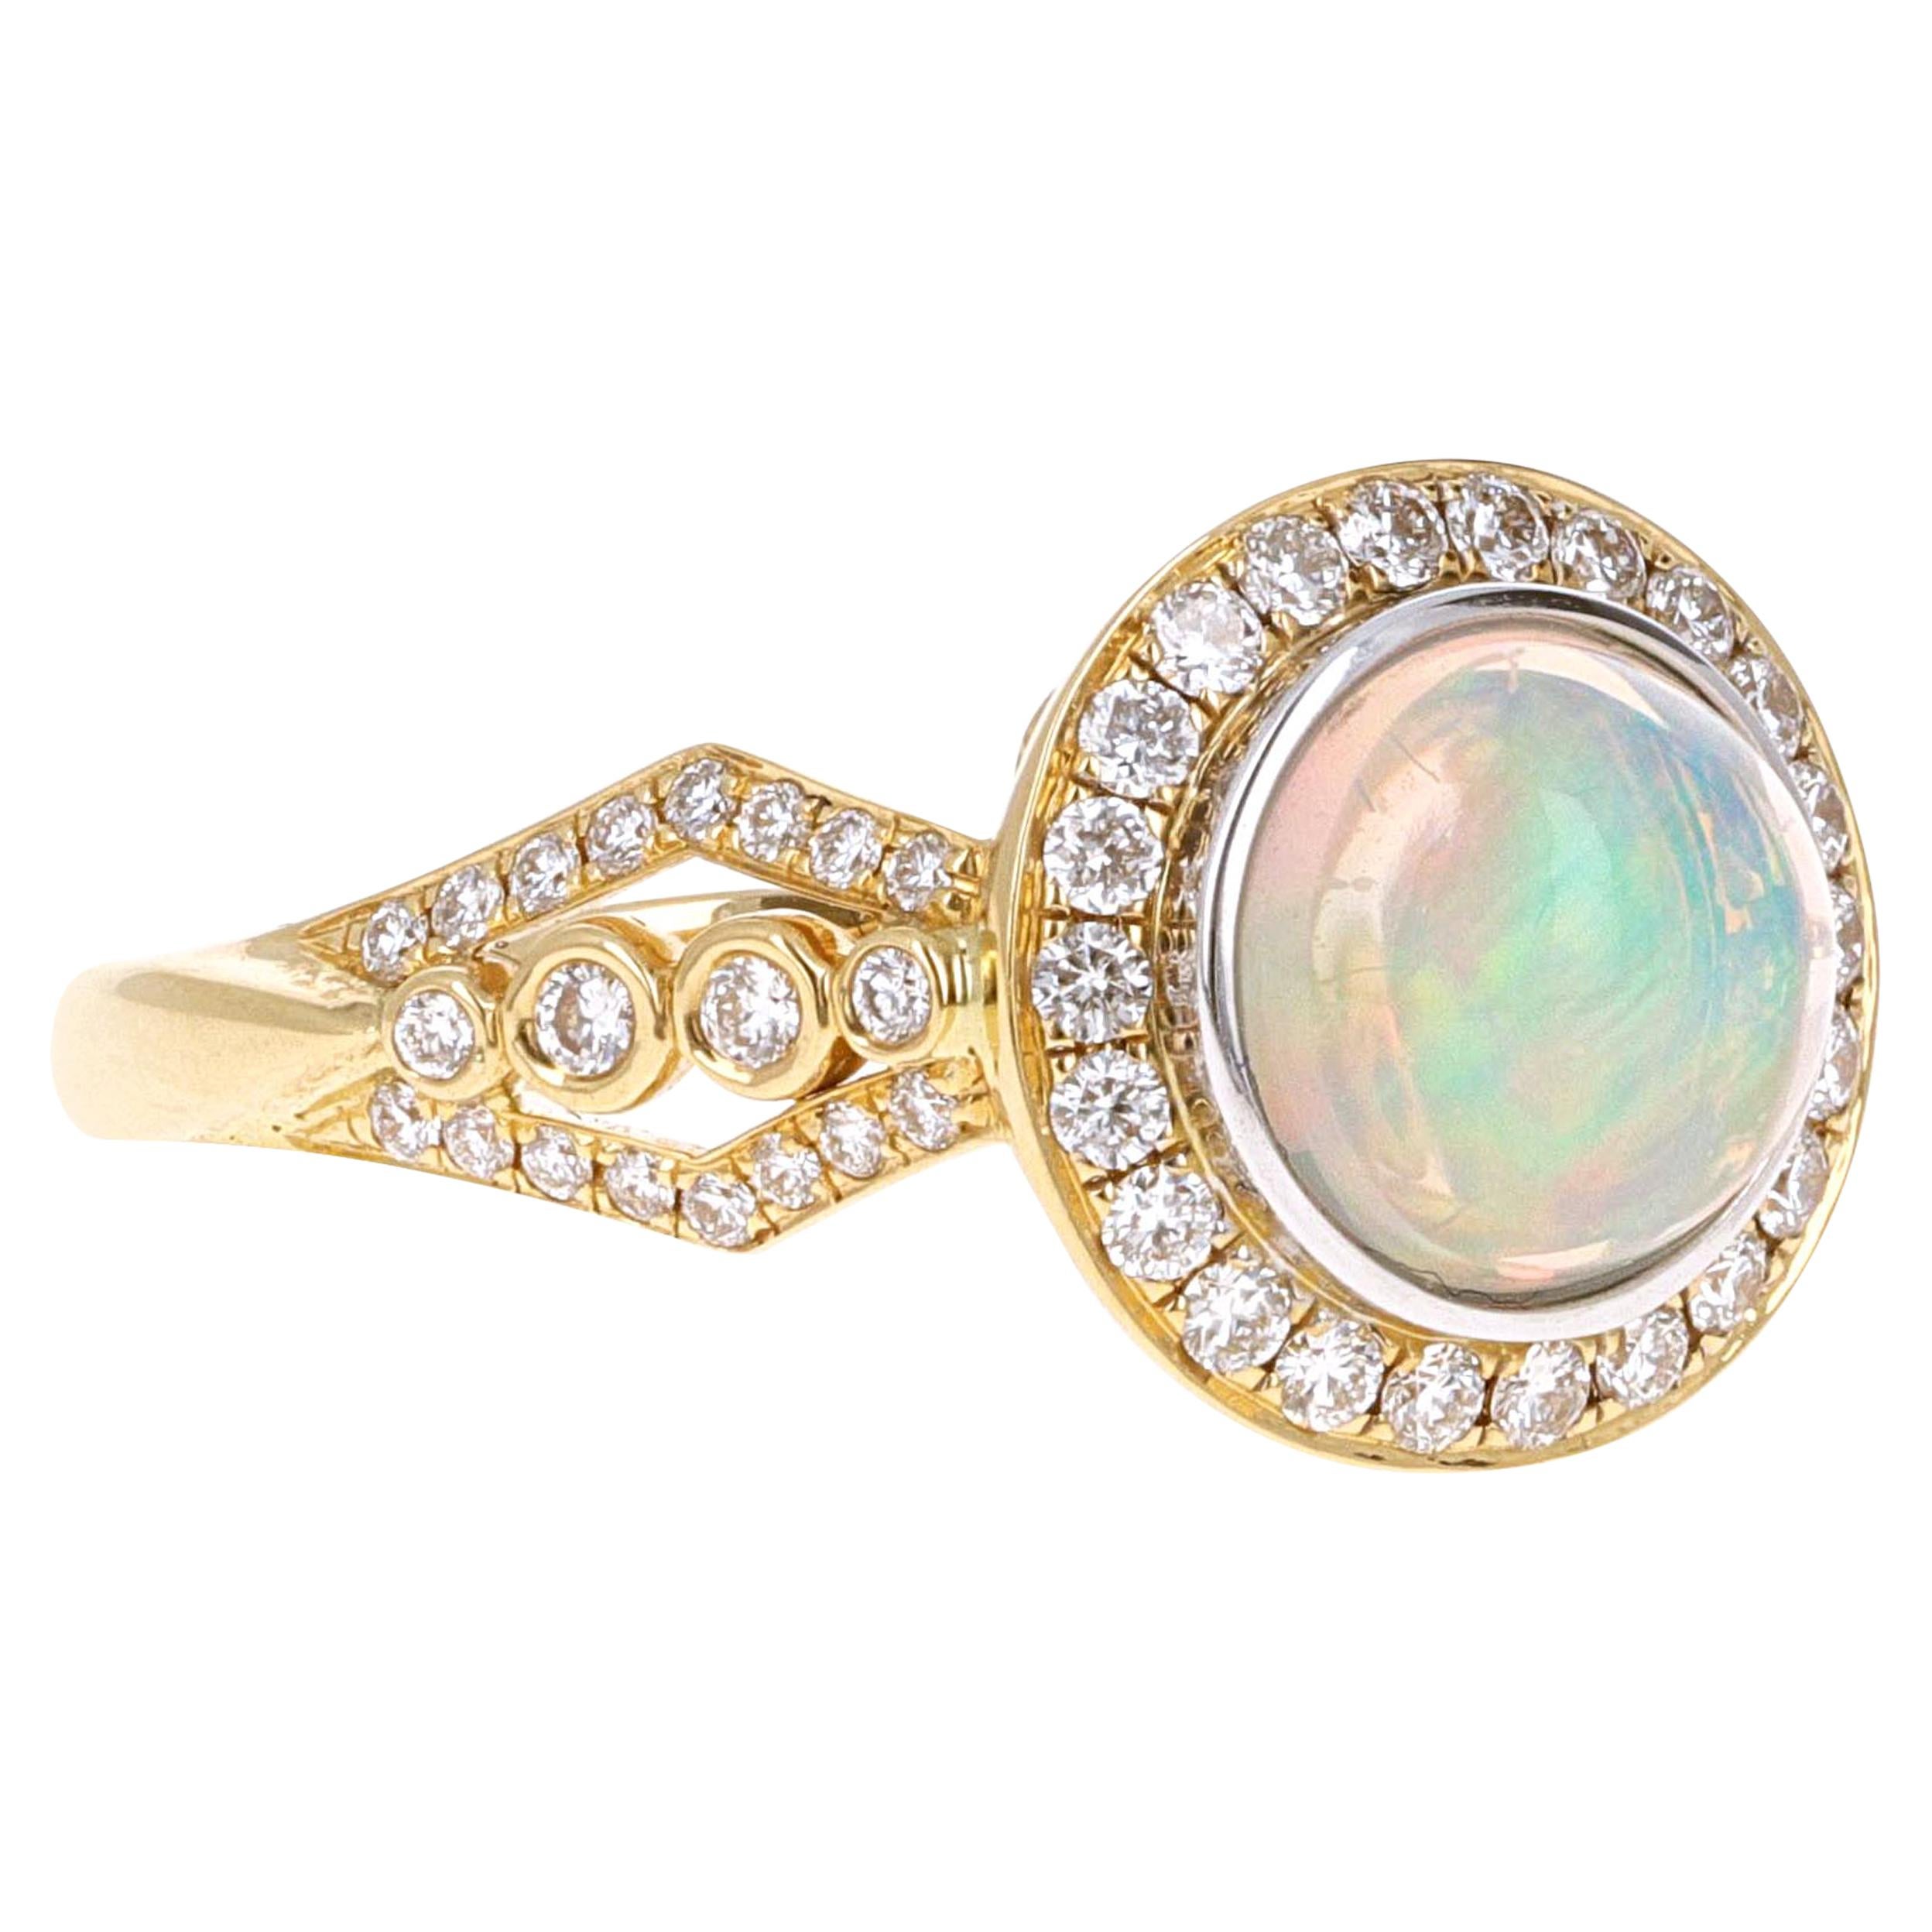 Philip Zahm Designs, 2.16 Carat Fire Opal and Diamond Cocktail Ring